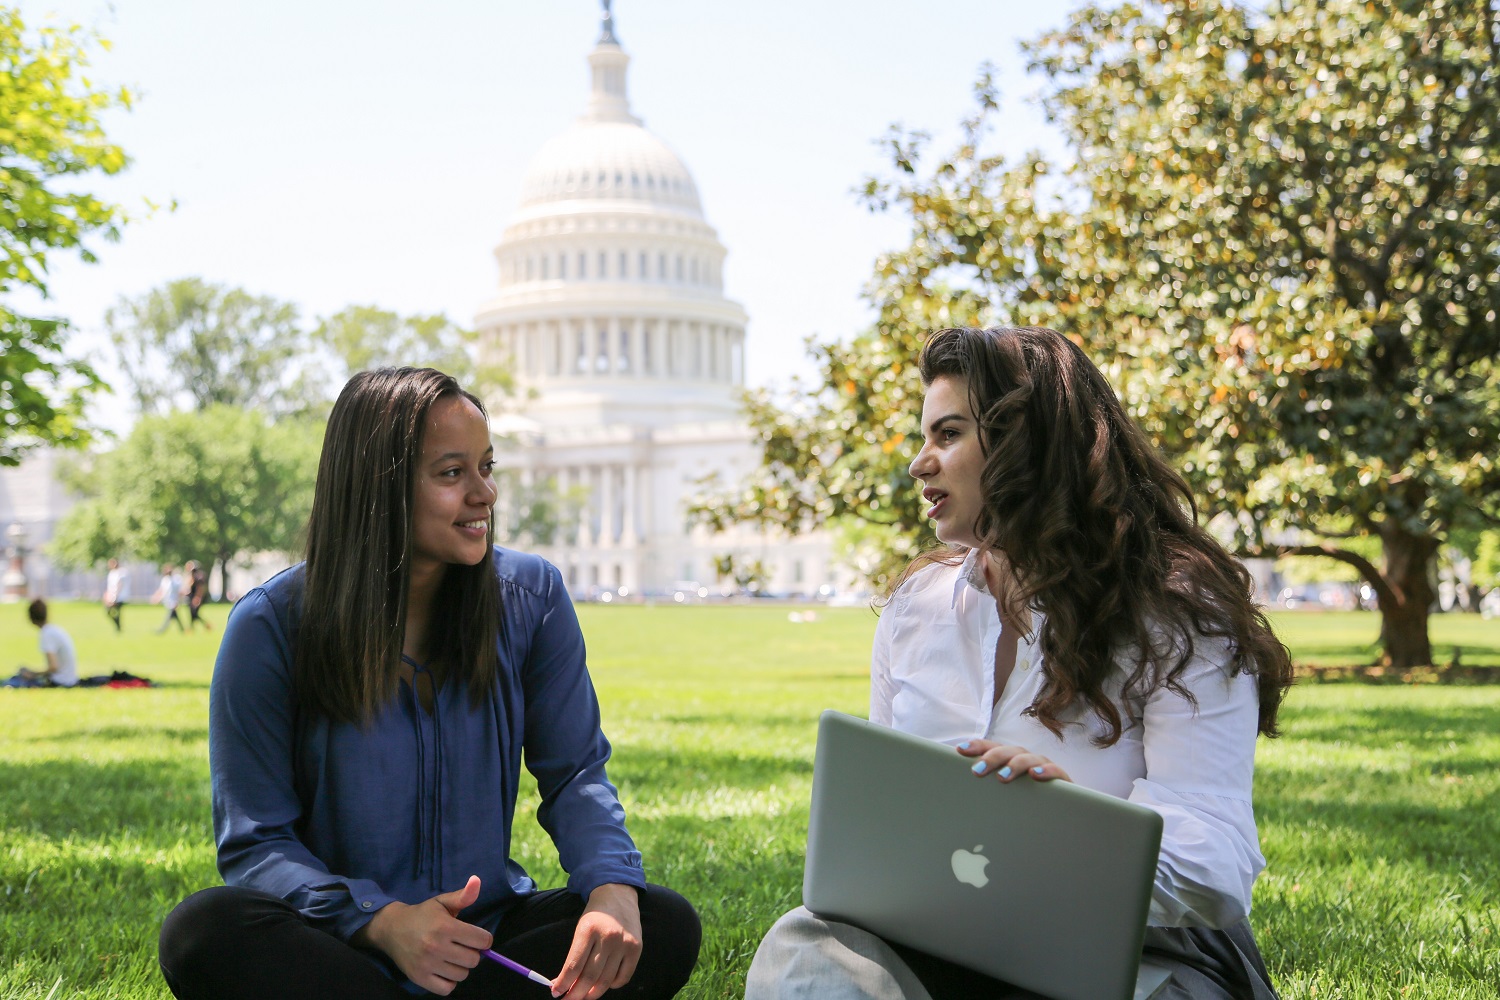 Students studying in front of the U.S. Capitol Building